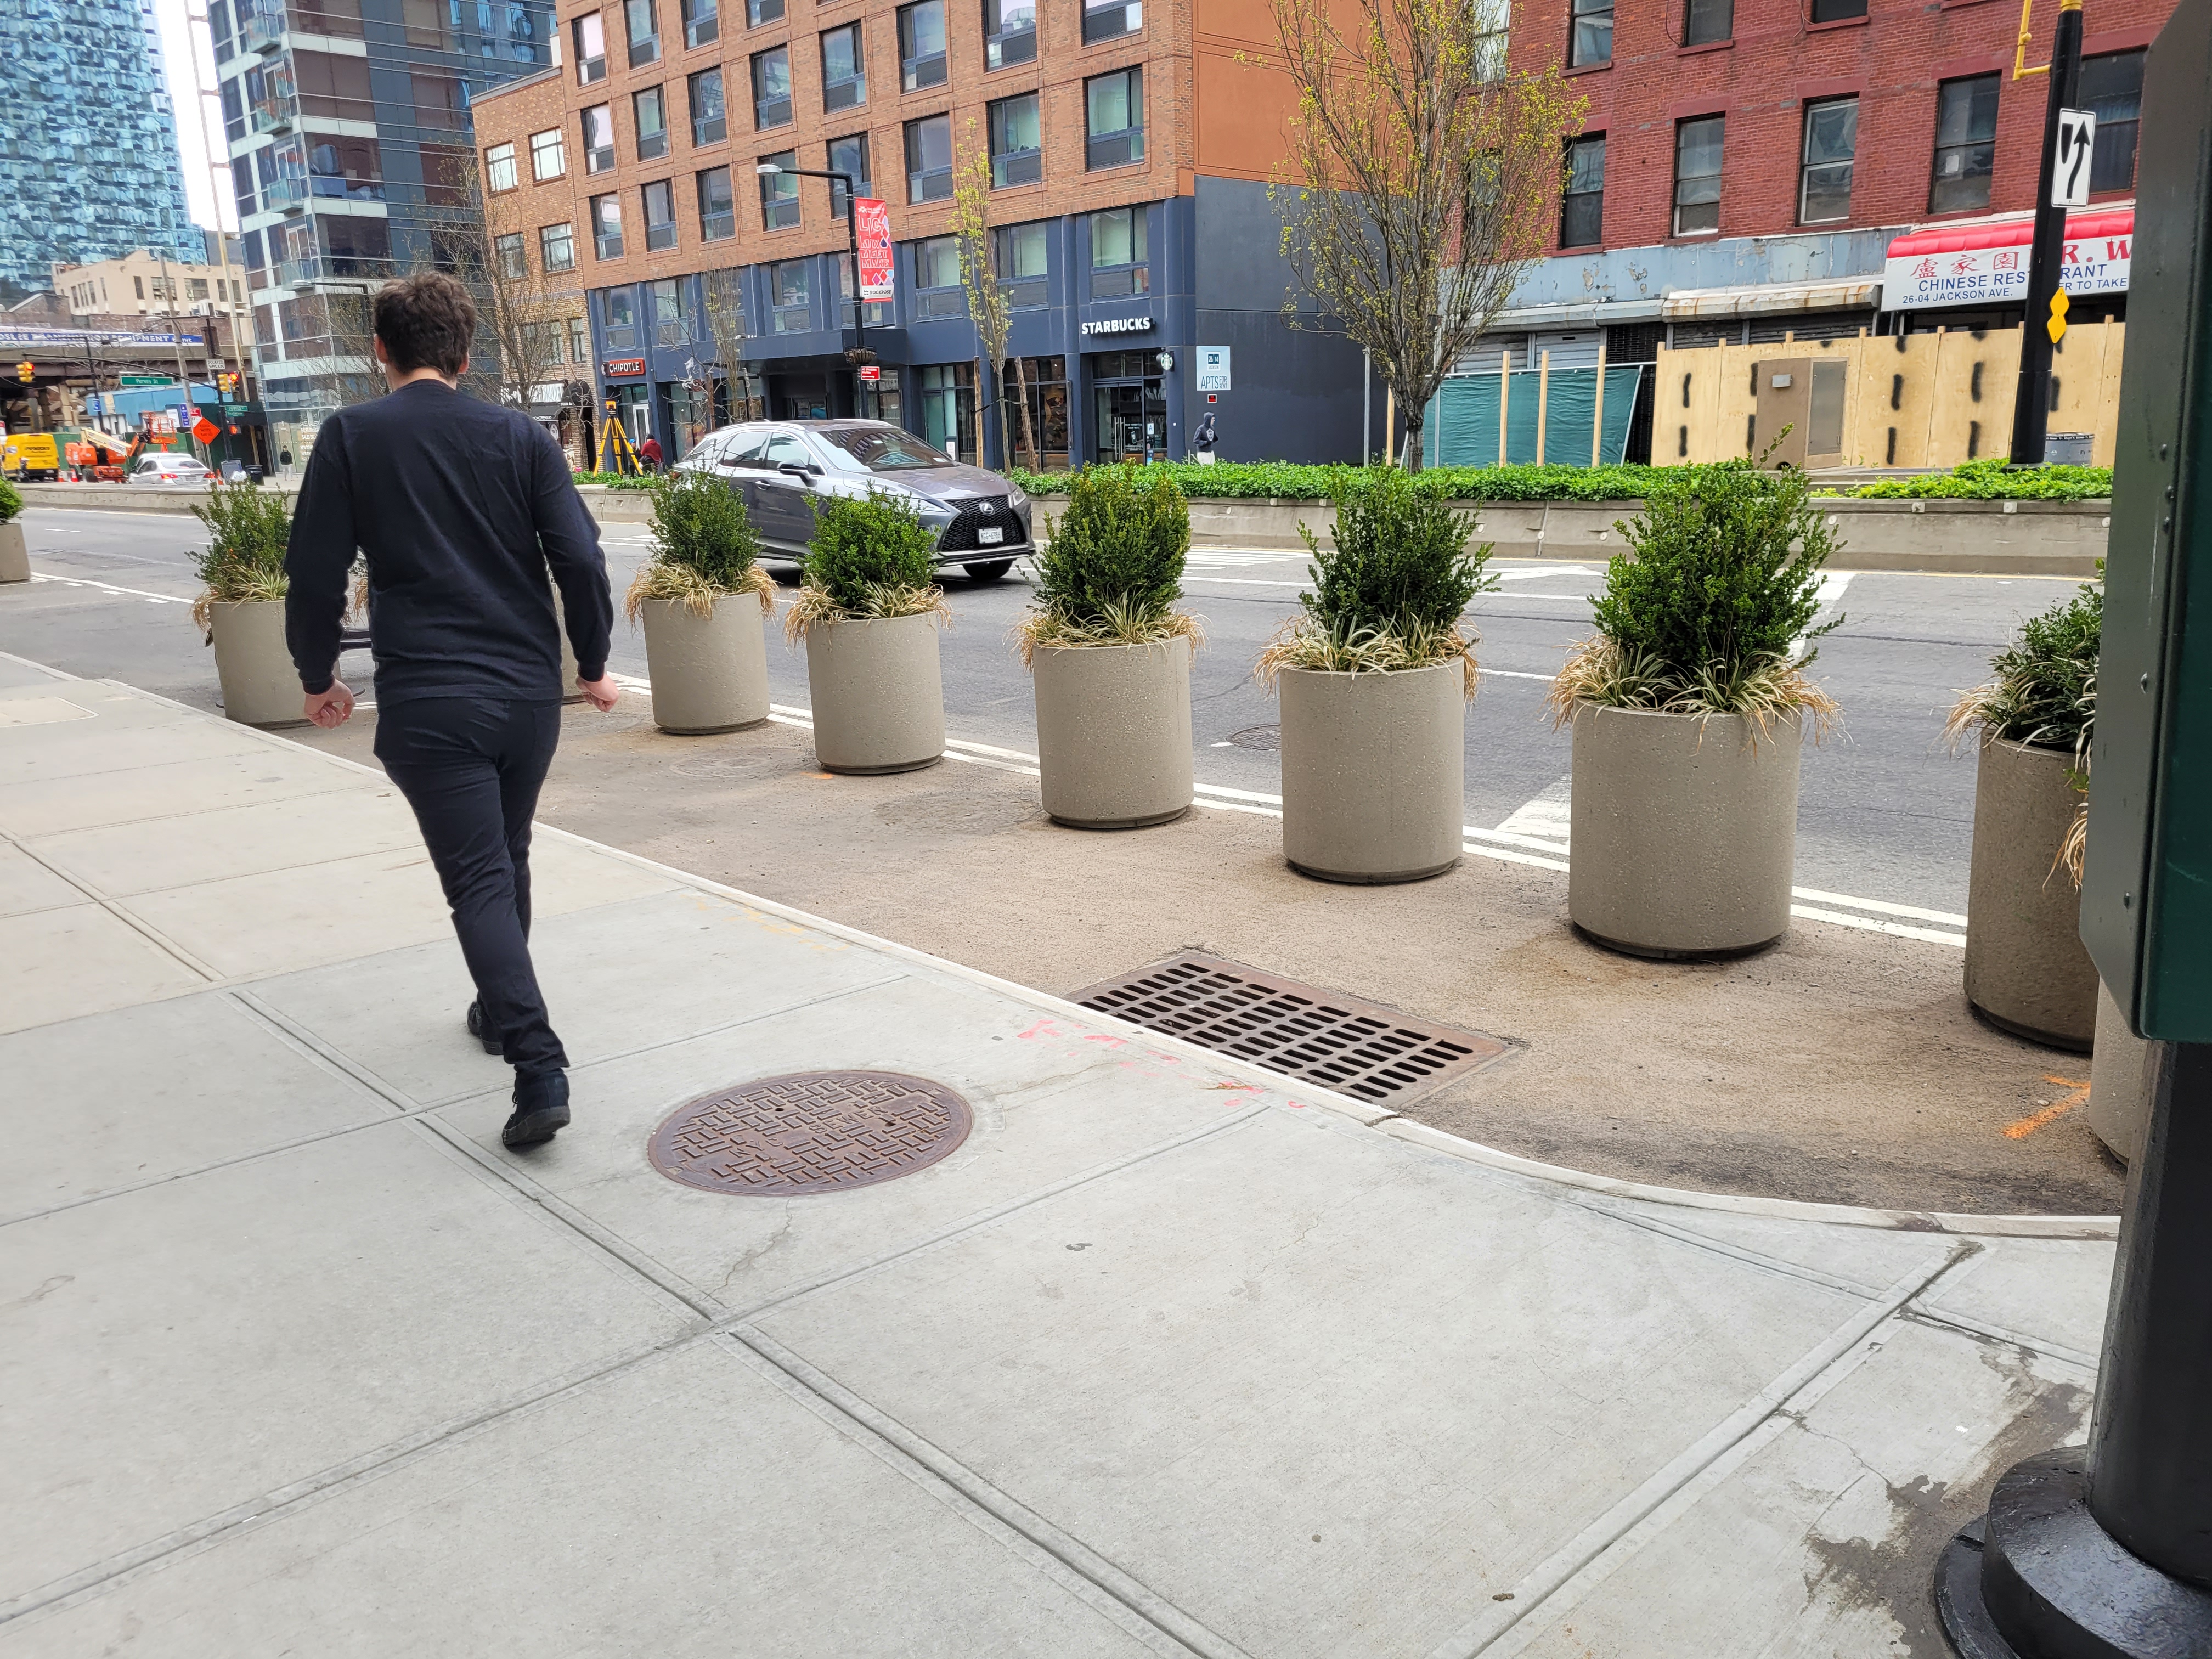 Expanded pedestrian space lined with planters on Jackson Avenue.